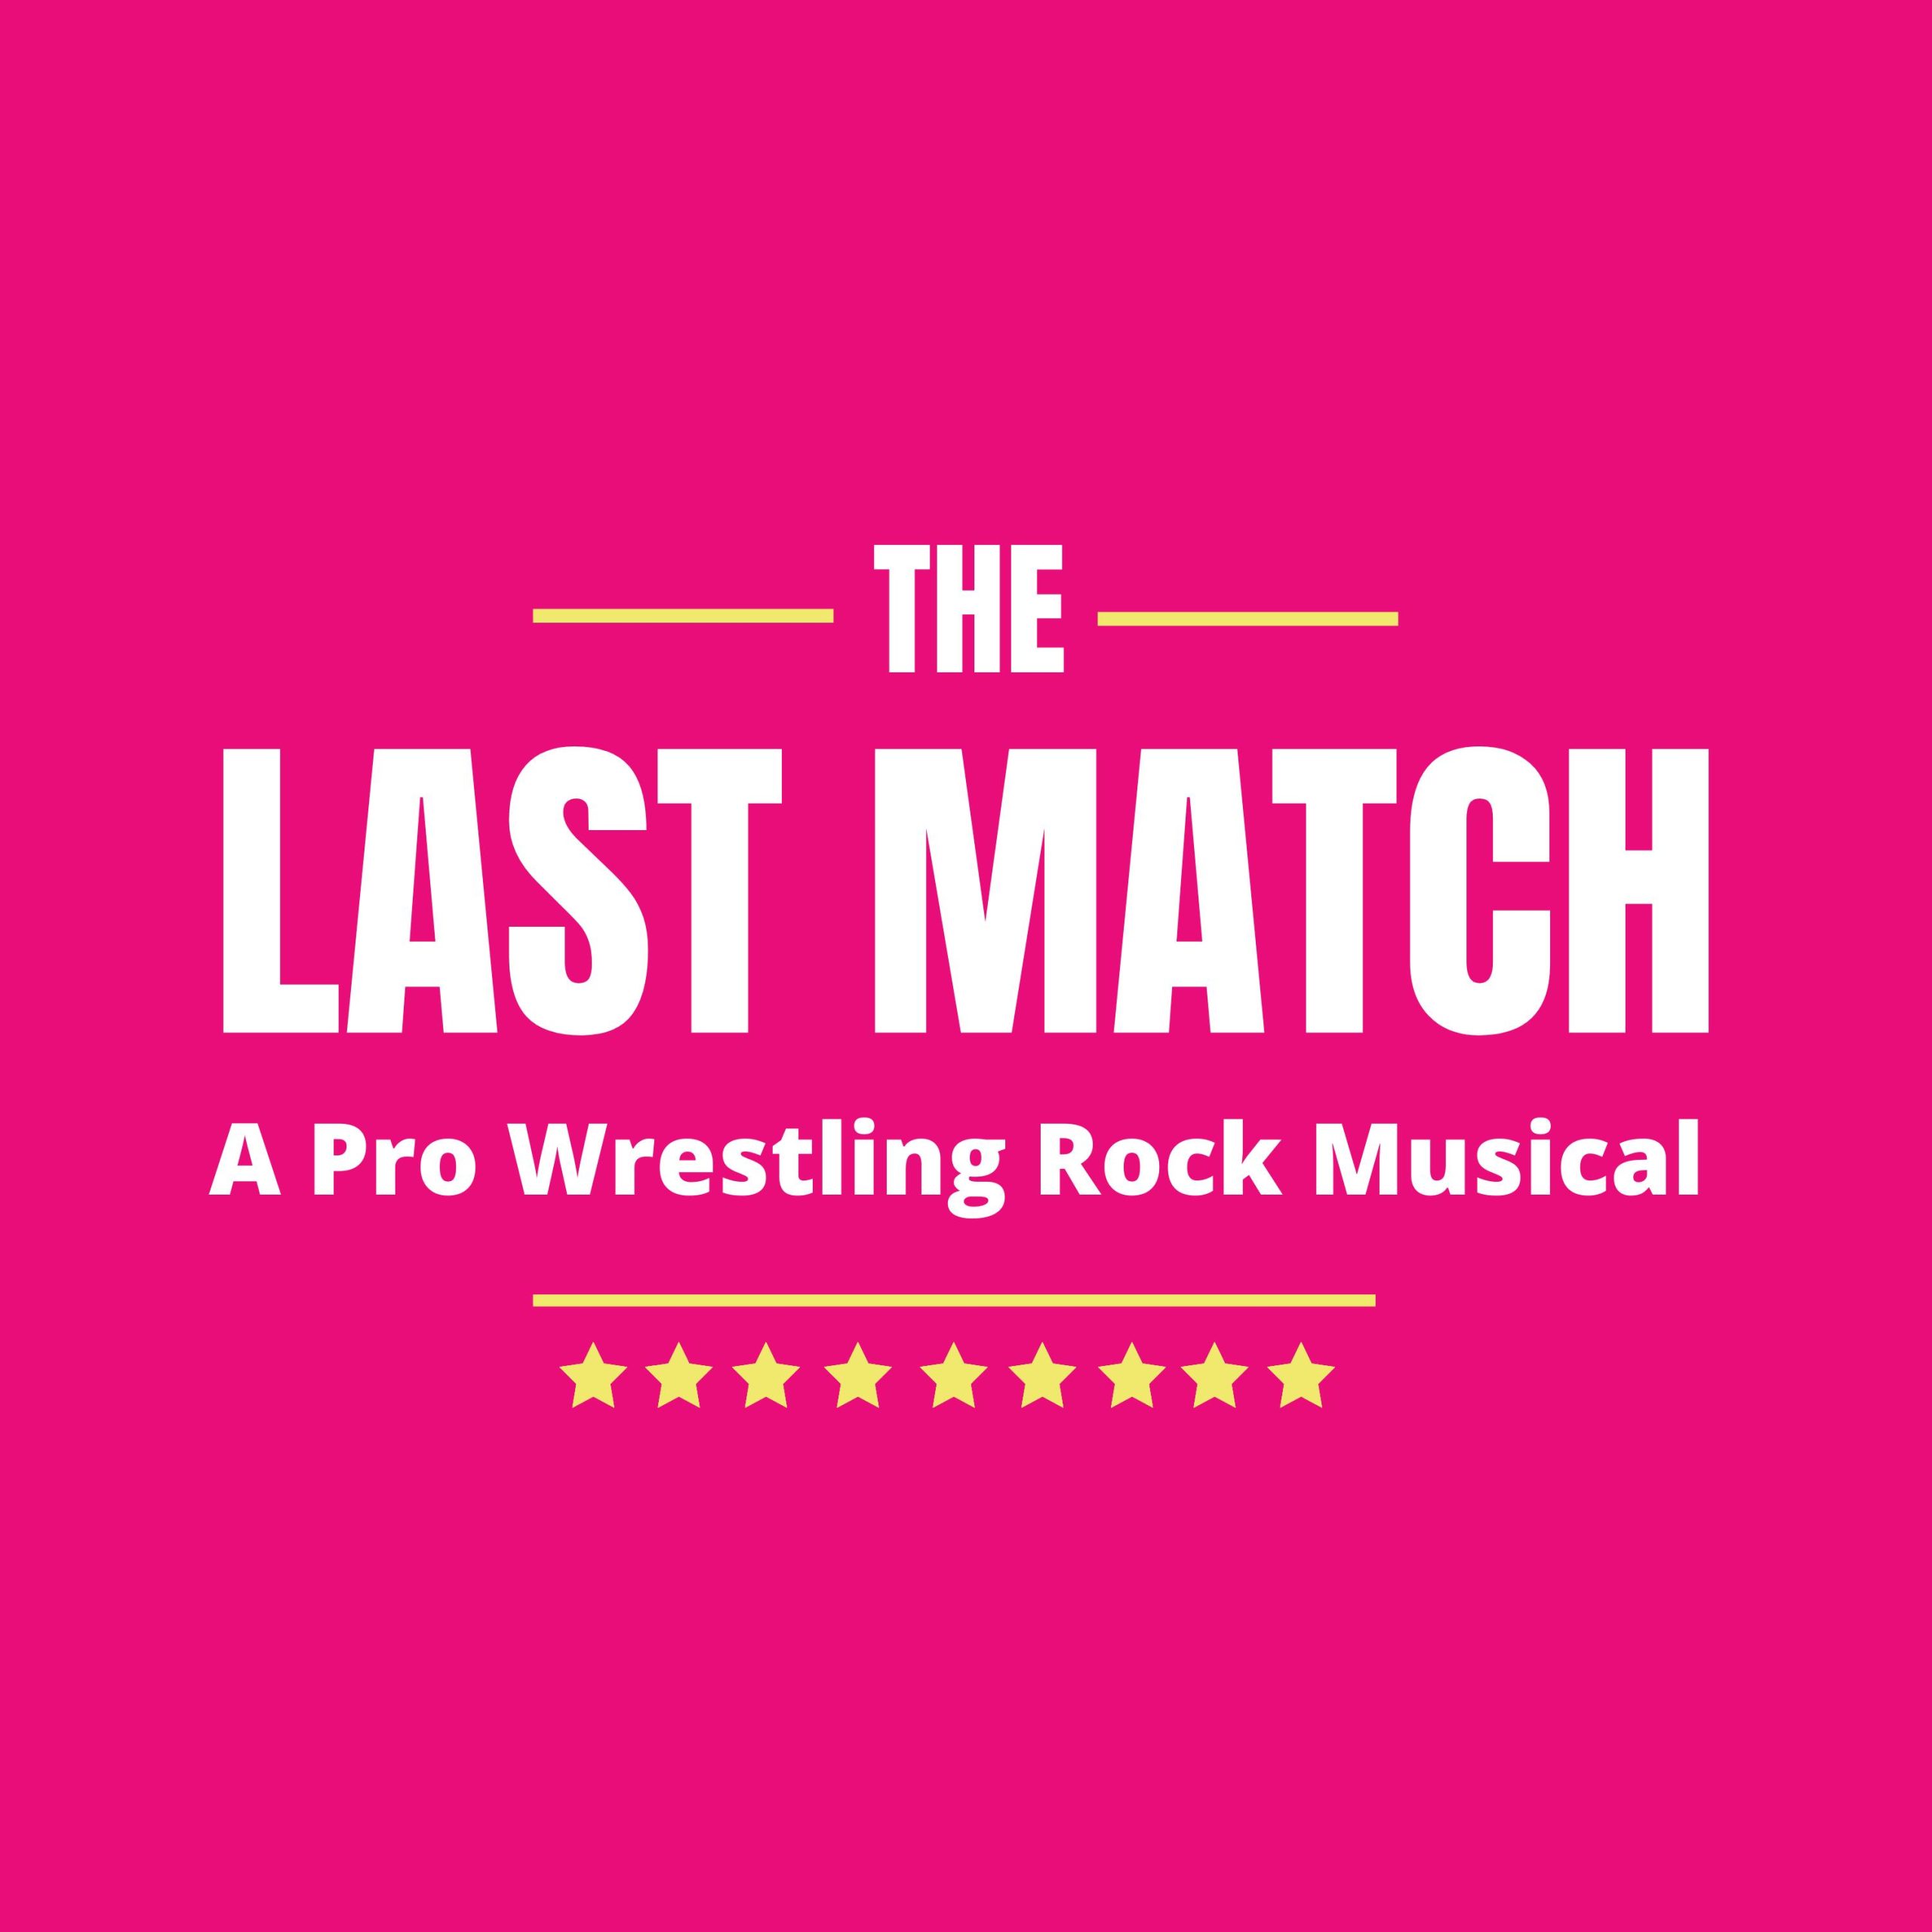 Pink square with white text; "The Last Match: A Pro Wrestling Rock Musical"